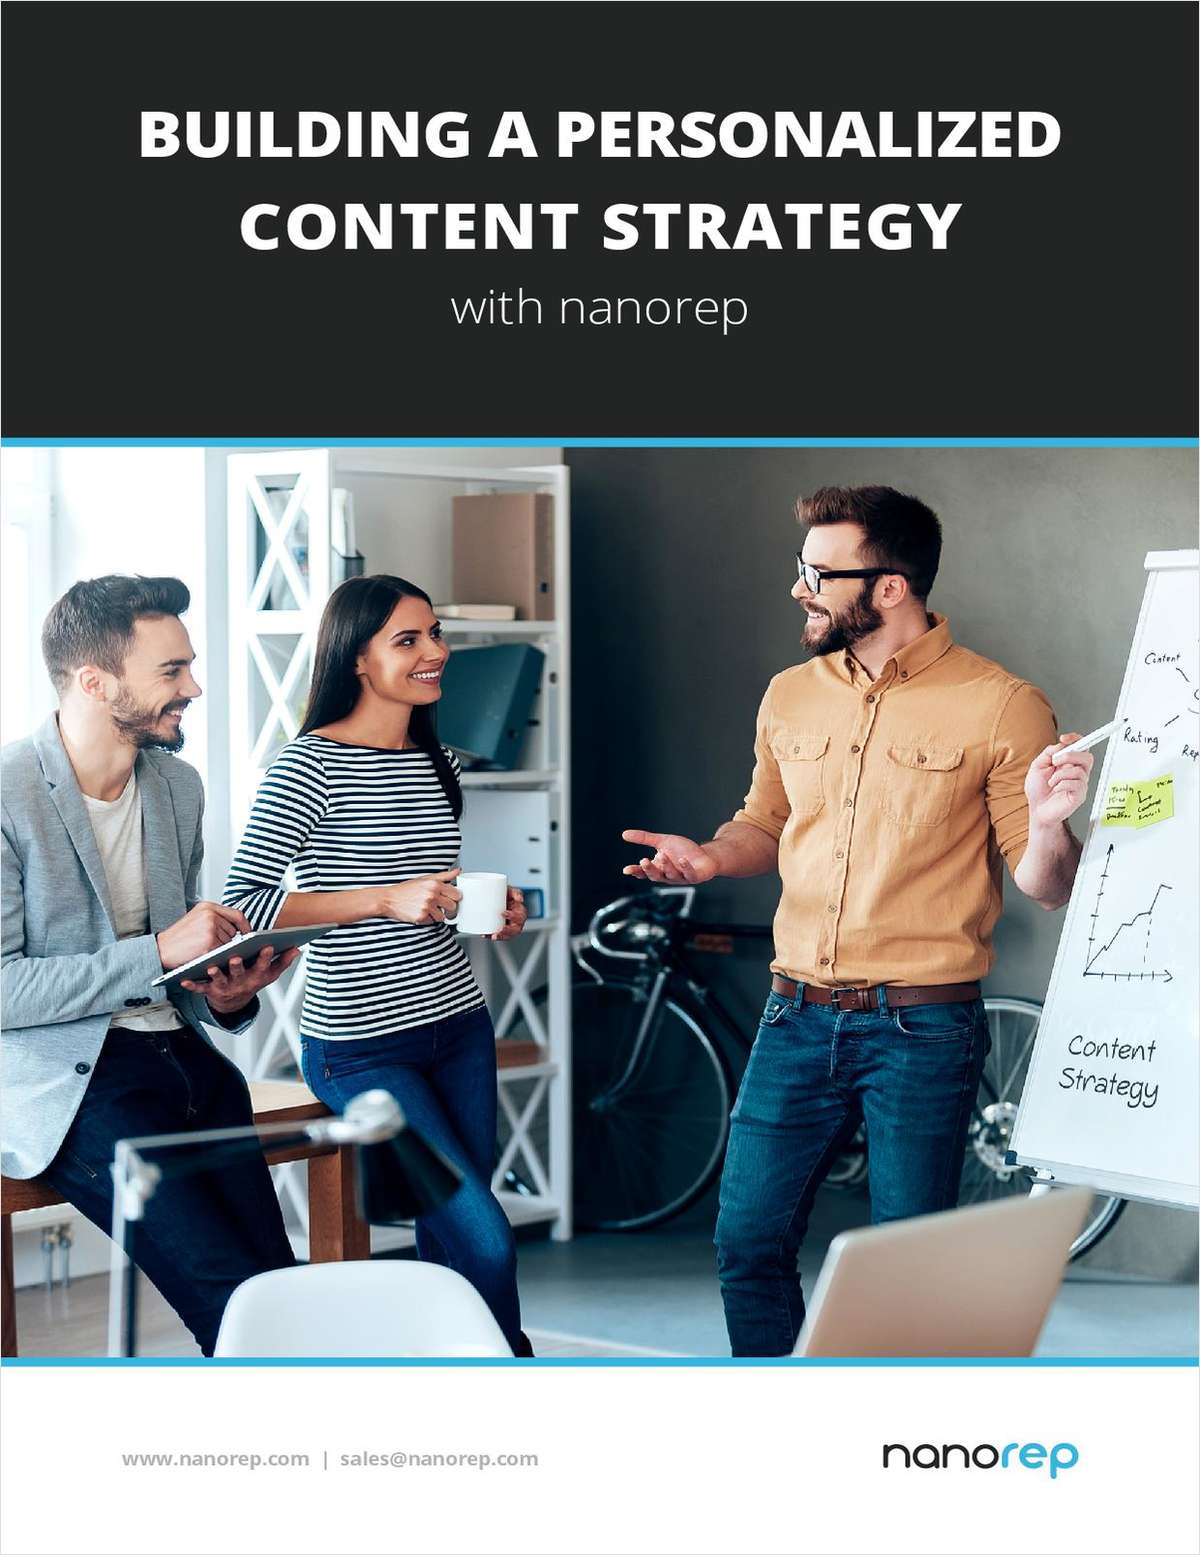 The 4 essentials of a successful Personalized Content Strategy